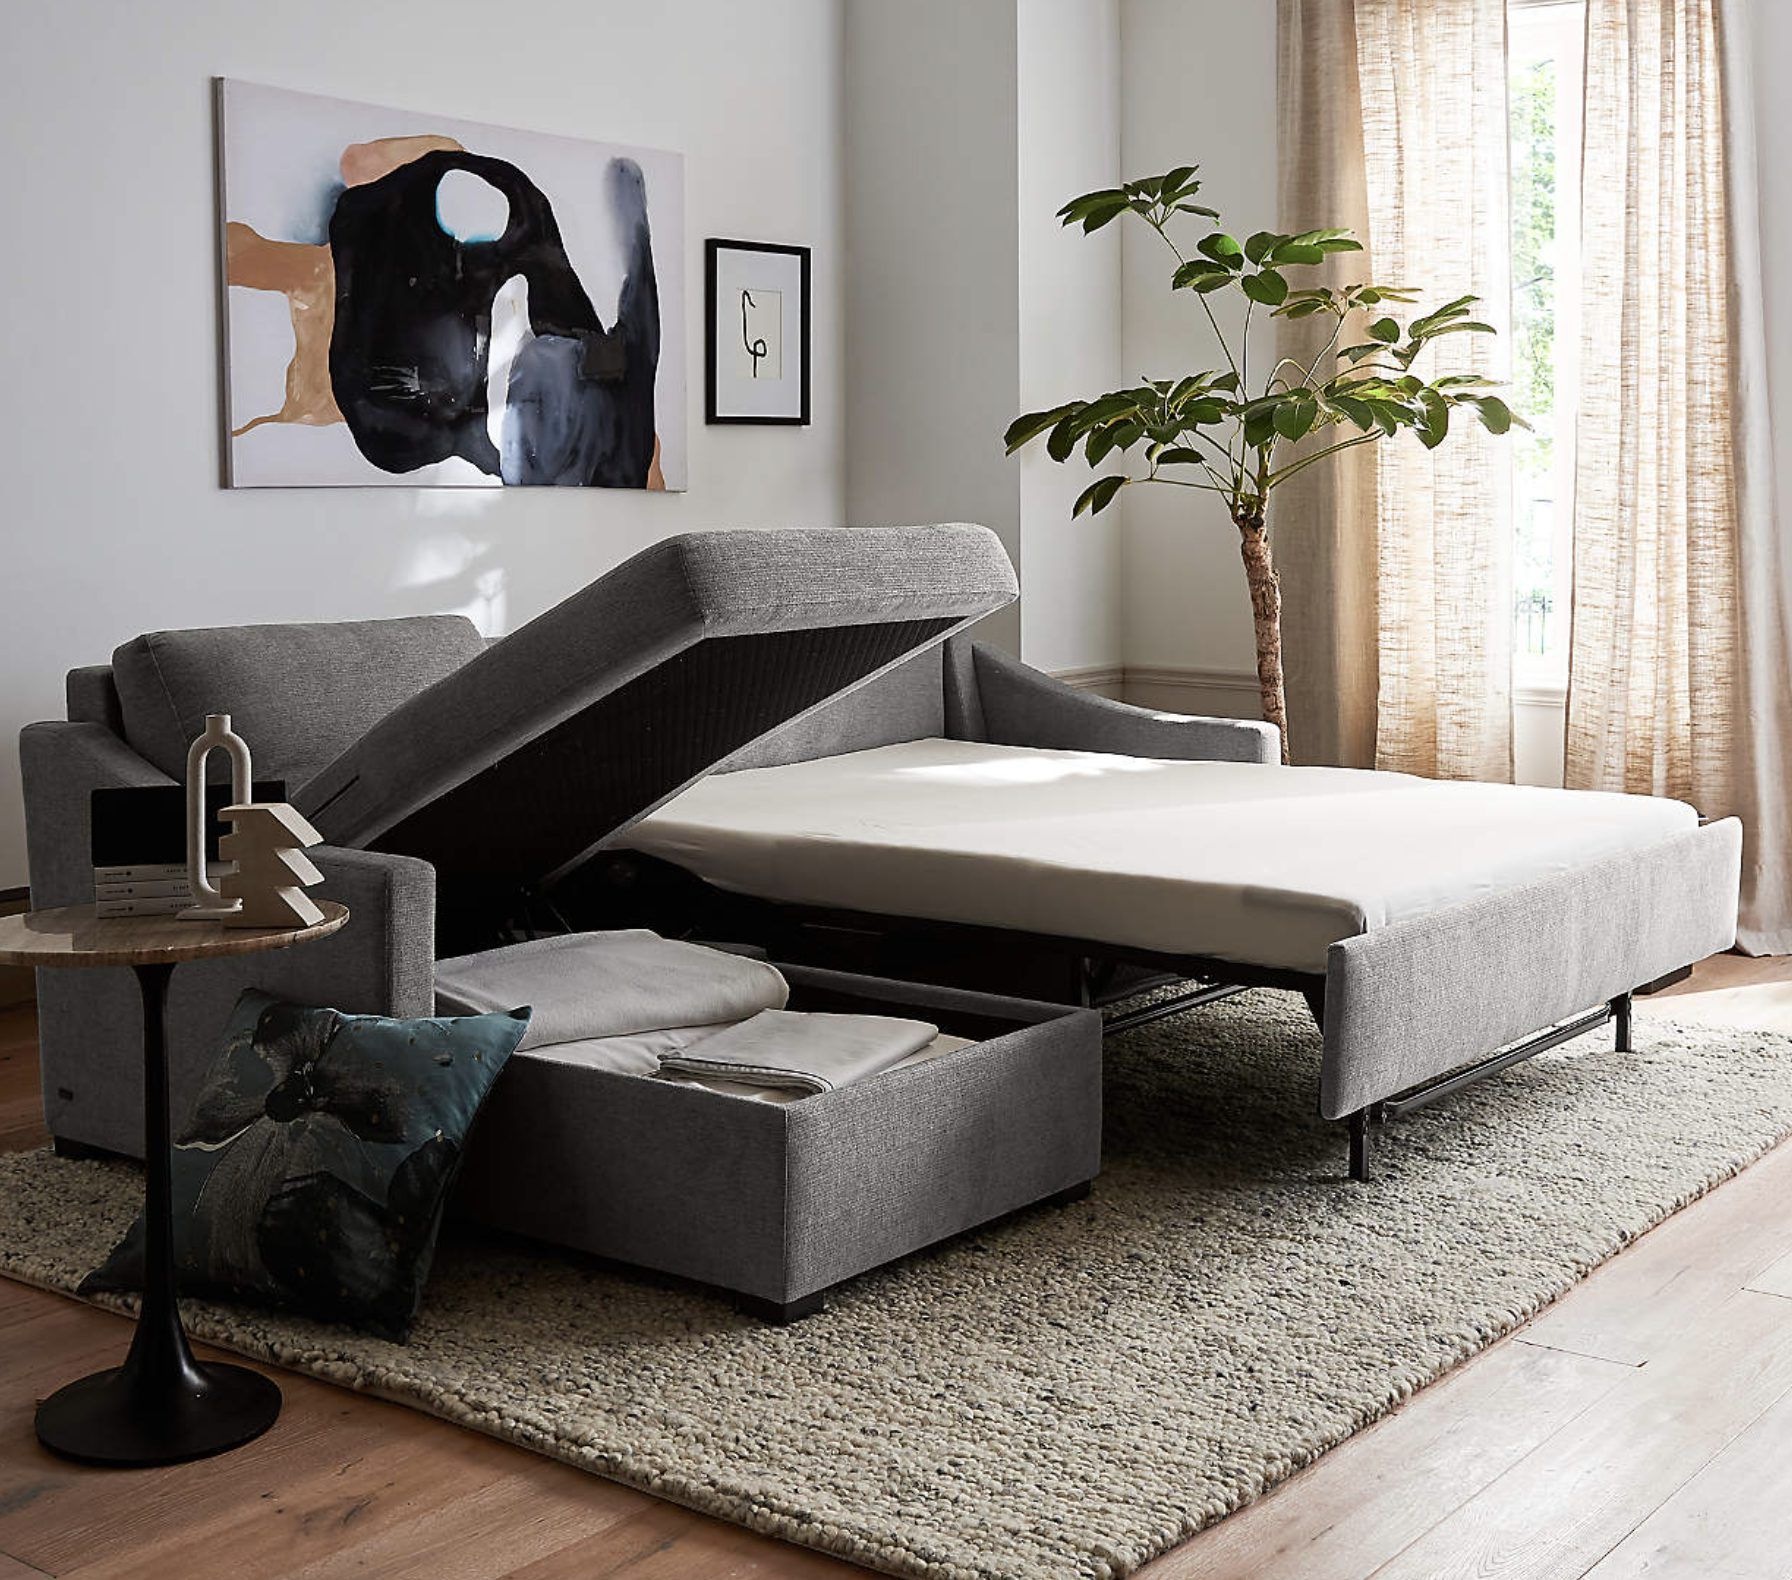 27 Of The Best Sectional Couches With Pull Out Beds In 2023 – Happily  Inspired Within Upholstered Modular Couches With Storage (Gallery 11 of 20)